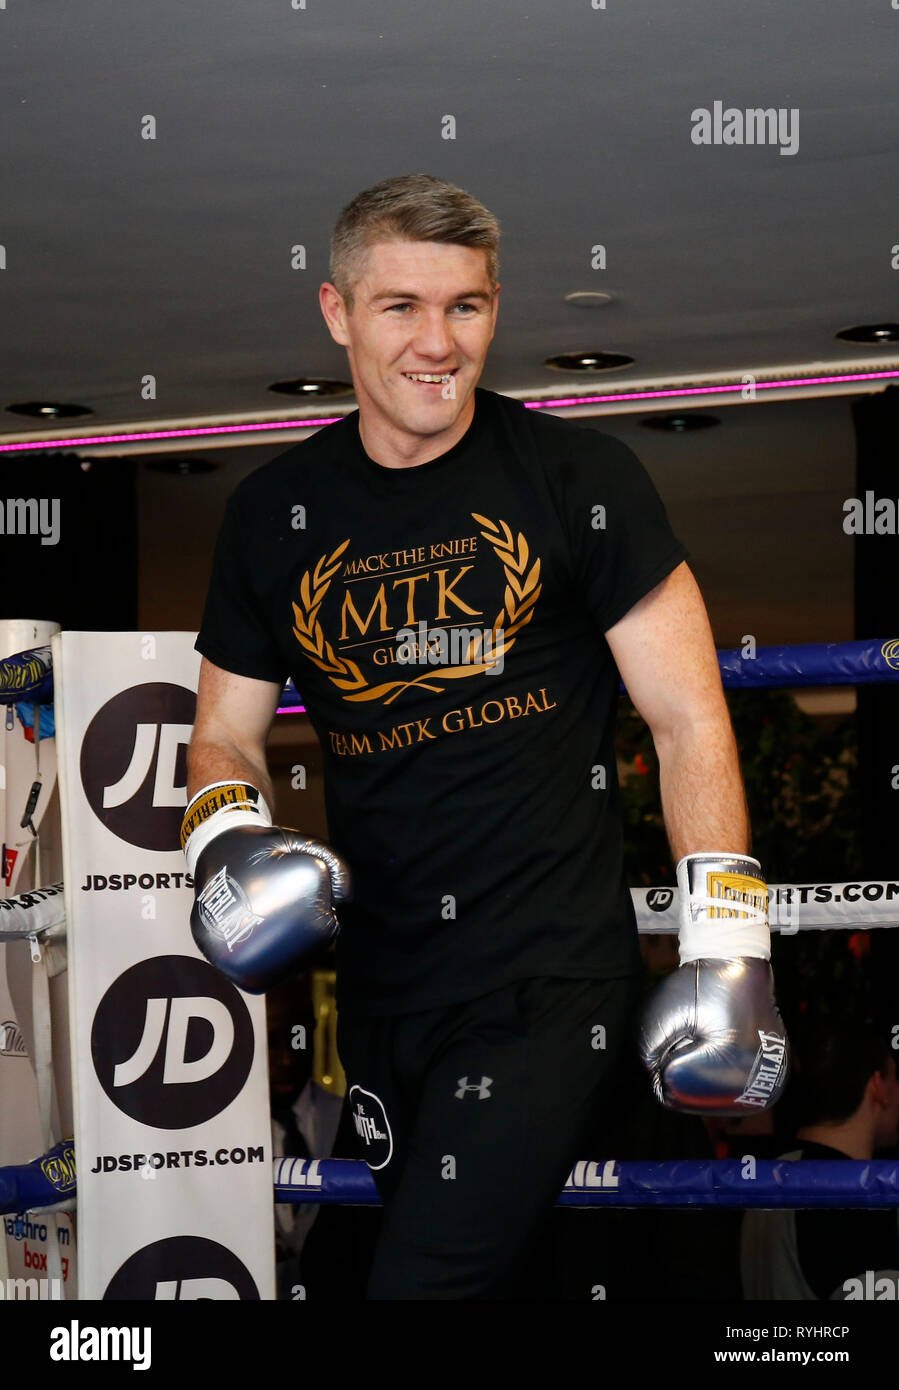 Liverpool Hilton Hotel, Liverpool, UK. 14th Mar, 2019. Matchroom boxing,  Liam Smith versus Sam Eggington open workout; Former WBO Super-Welterweight  World Champion Liam Smith at today's open training session ahead of his